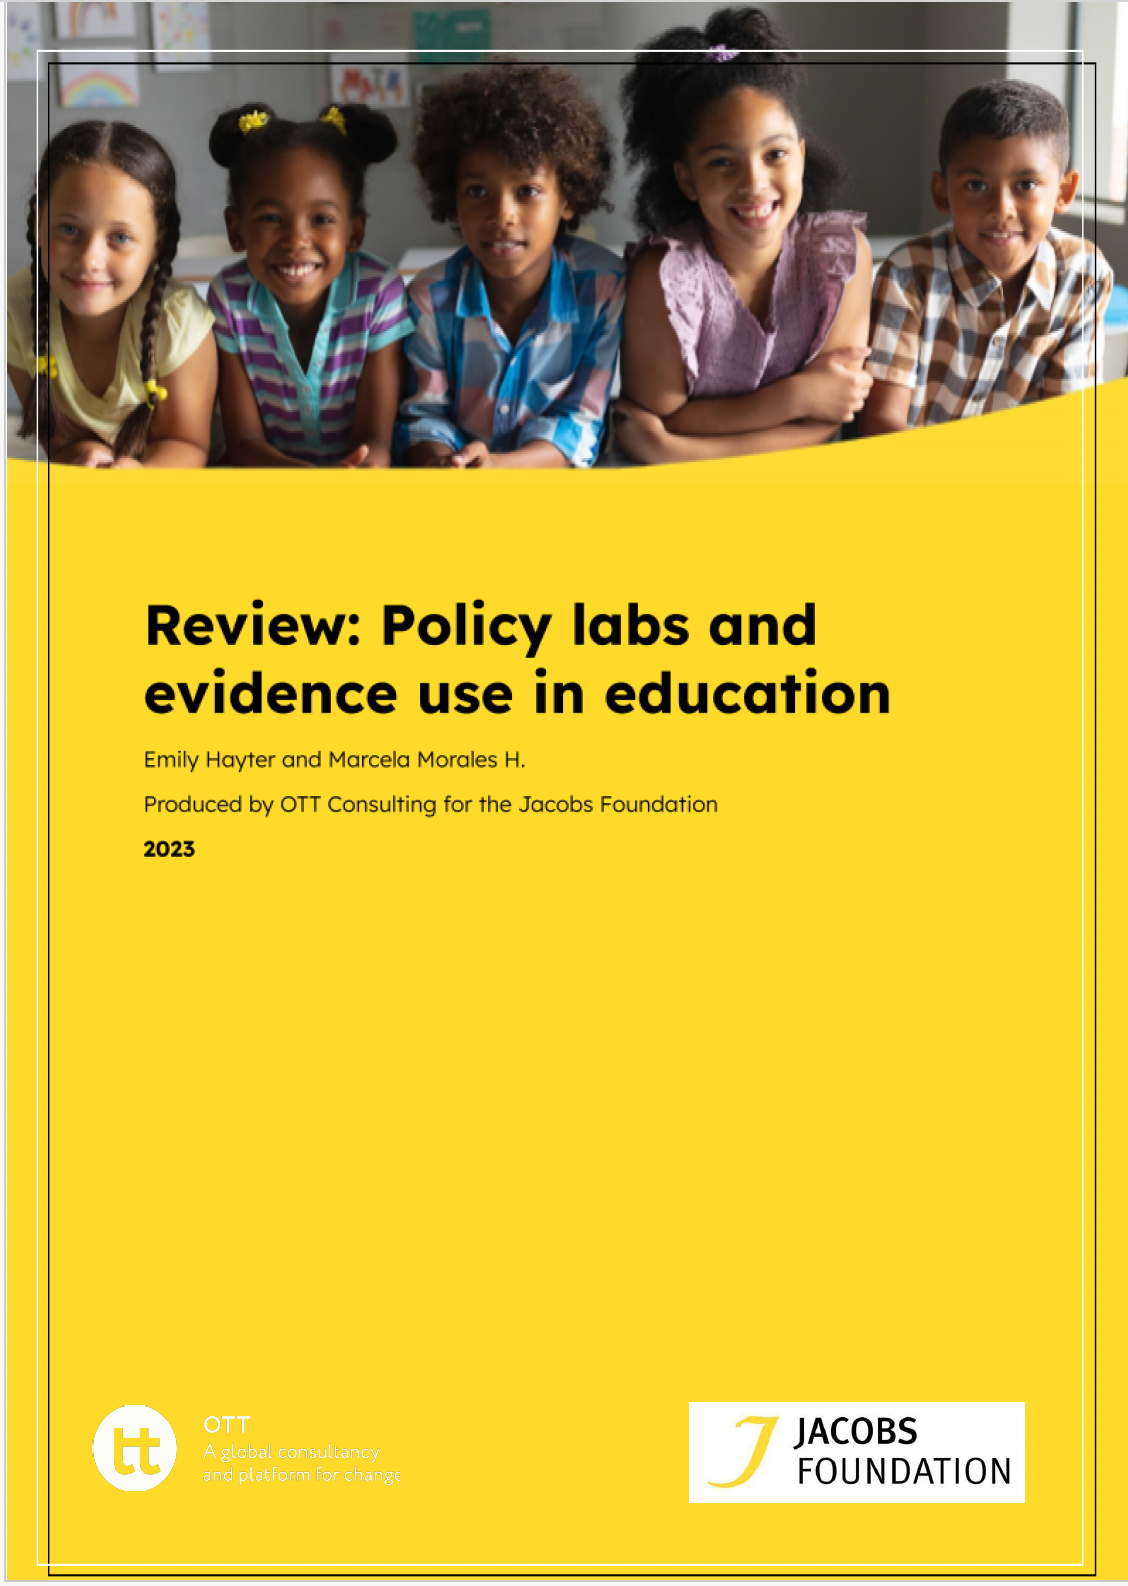 Policy labs and evidence use in education